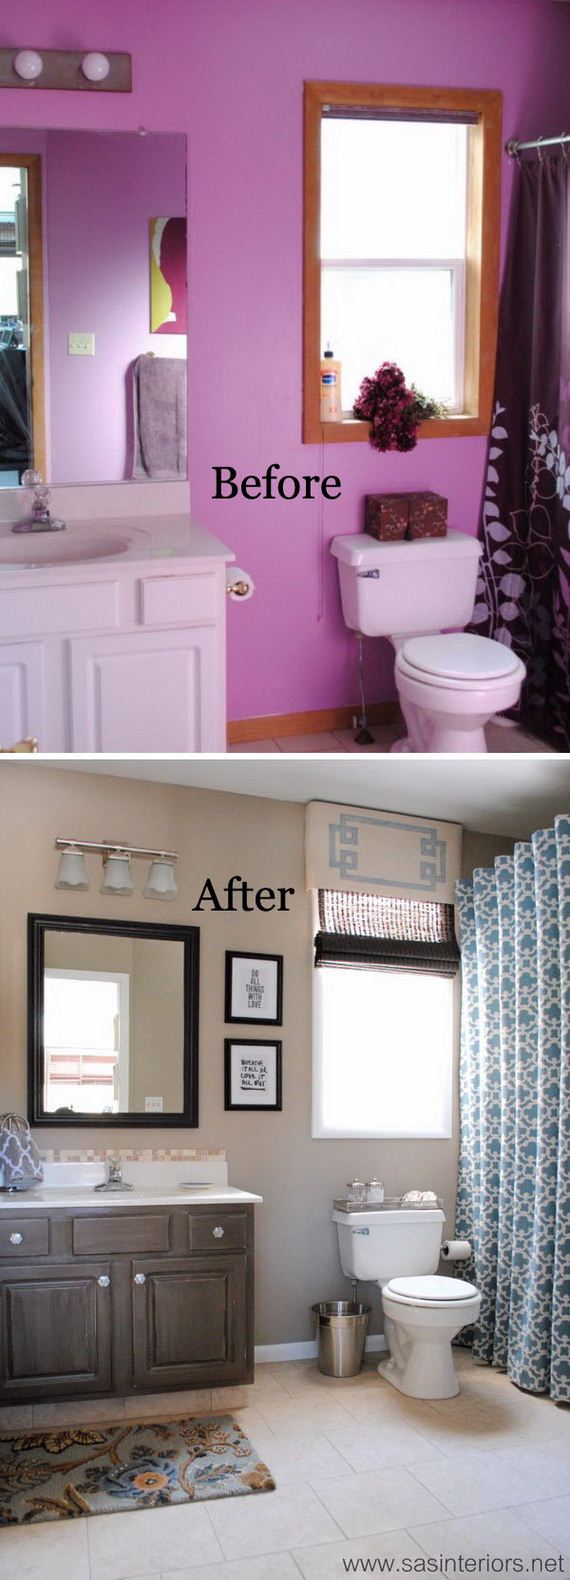 22-awesome-bathroom-makeovers